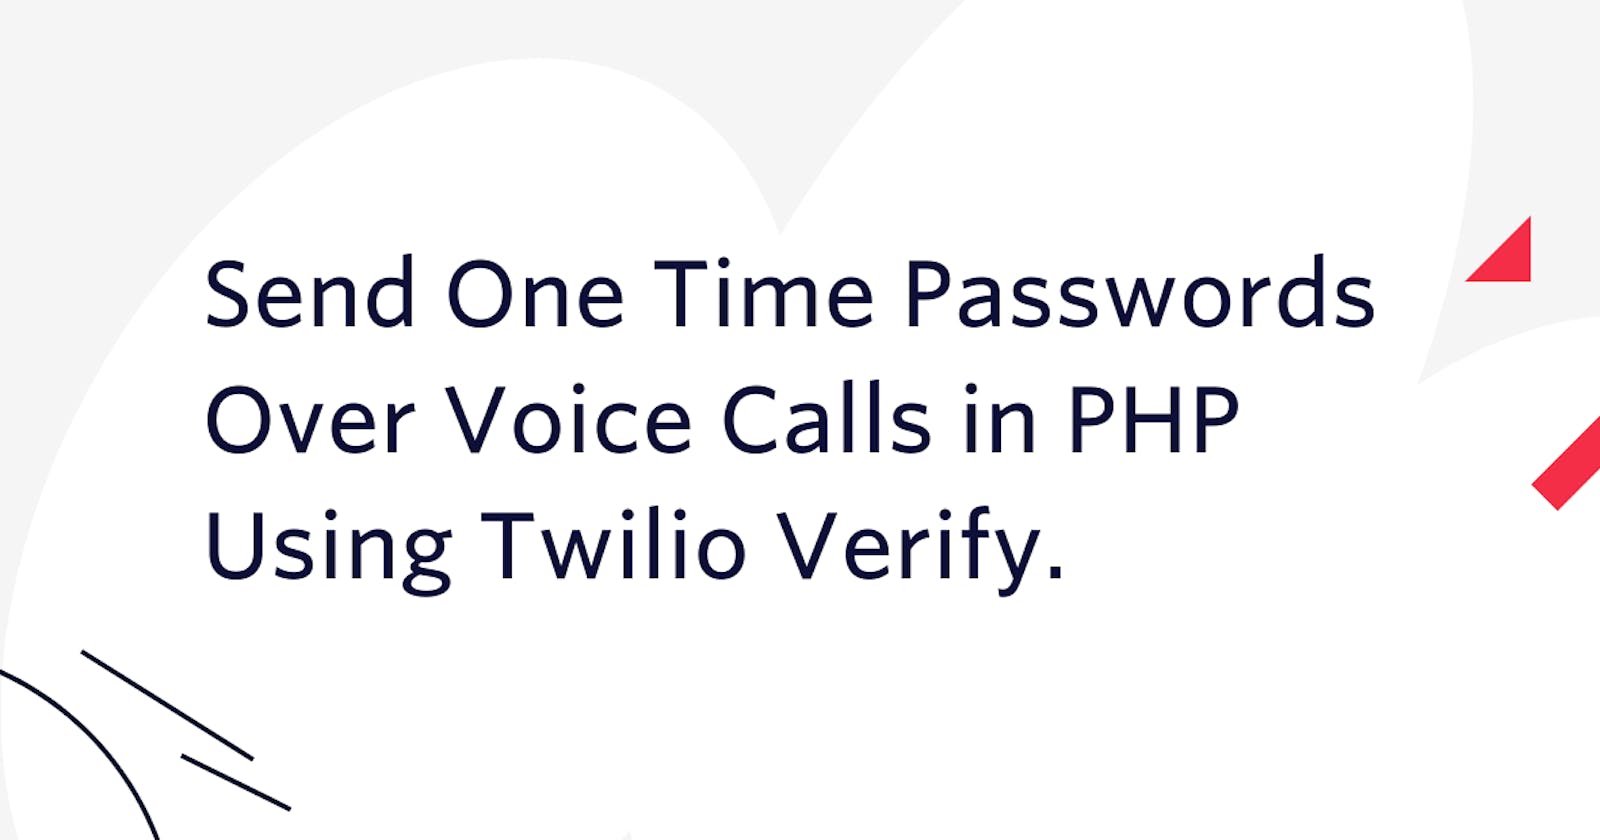 Send One Time Passwords Over Voice Calls in PHP Using Twilio Verify